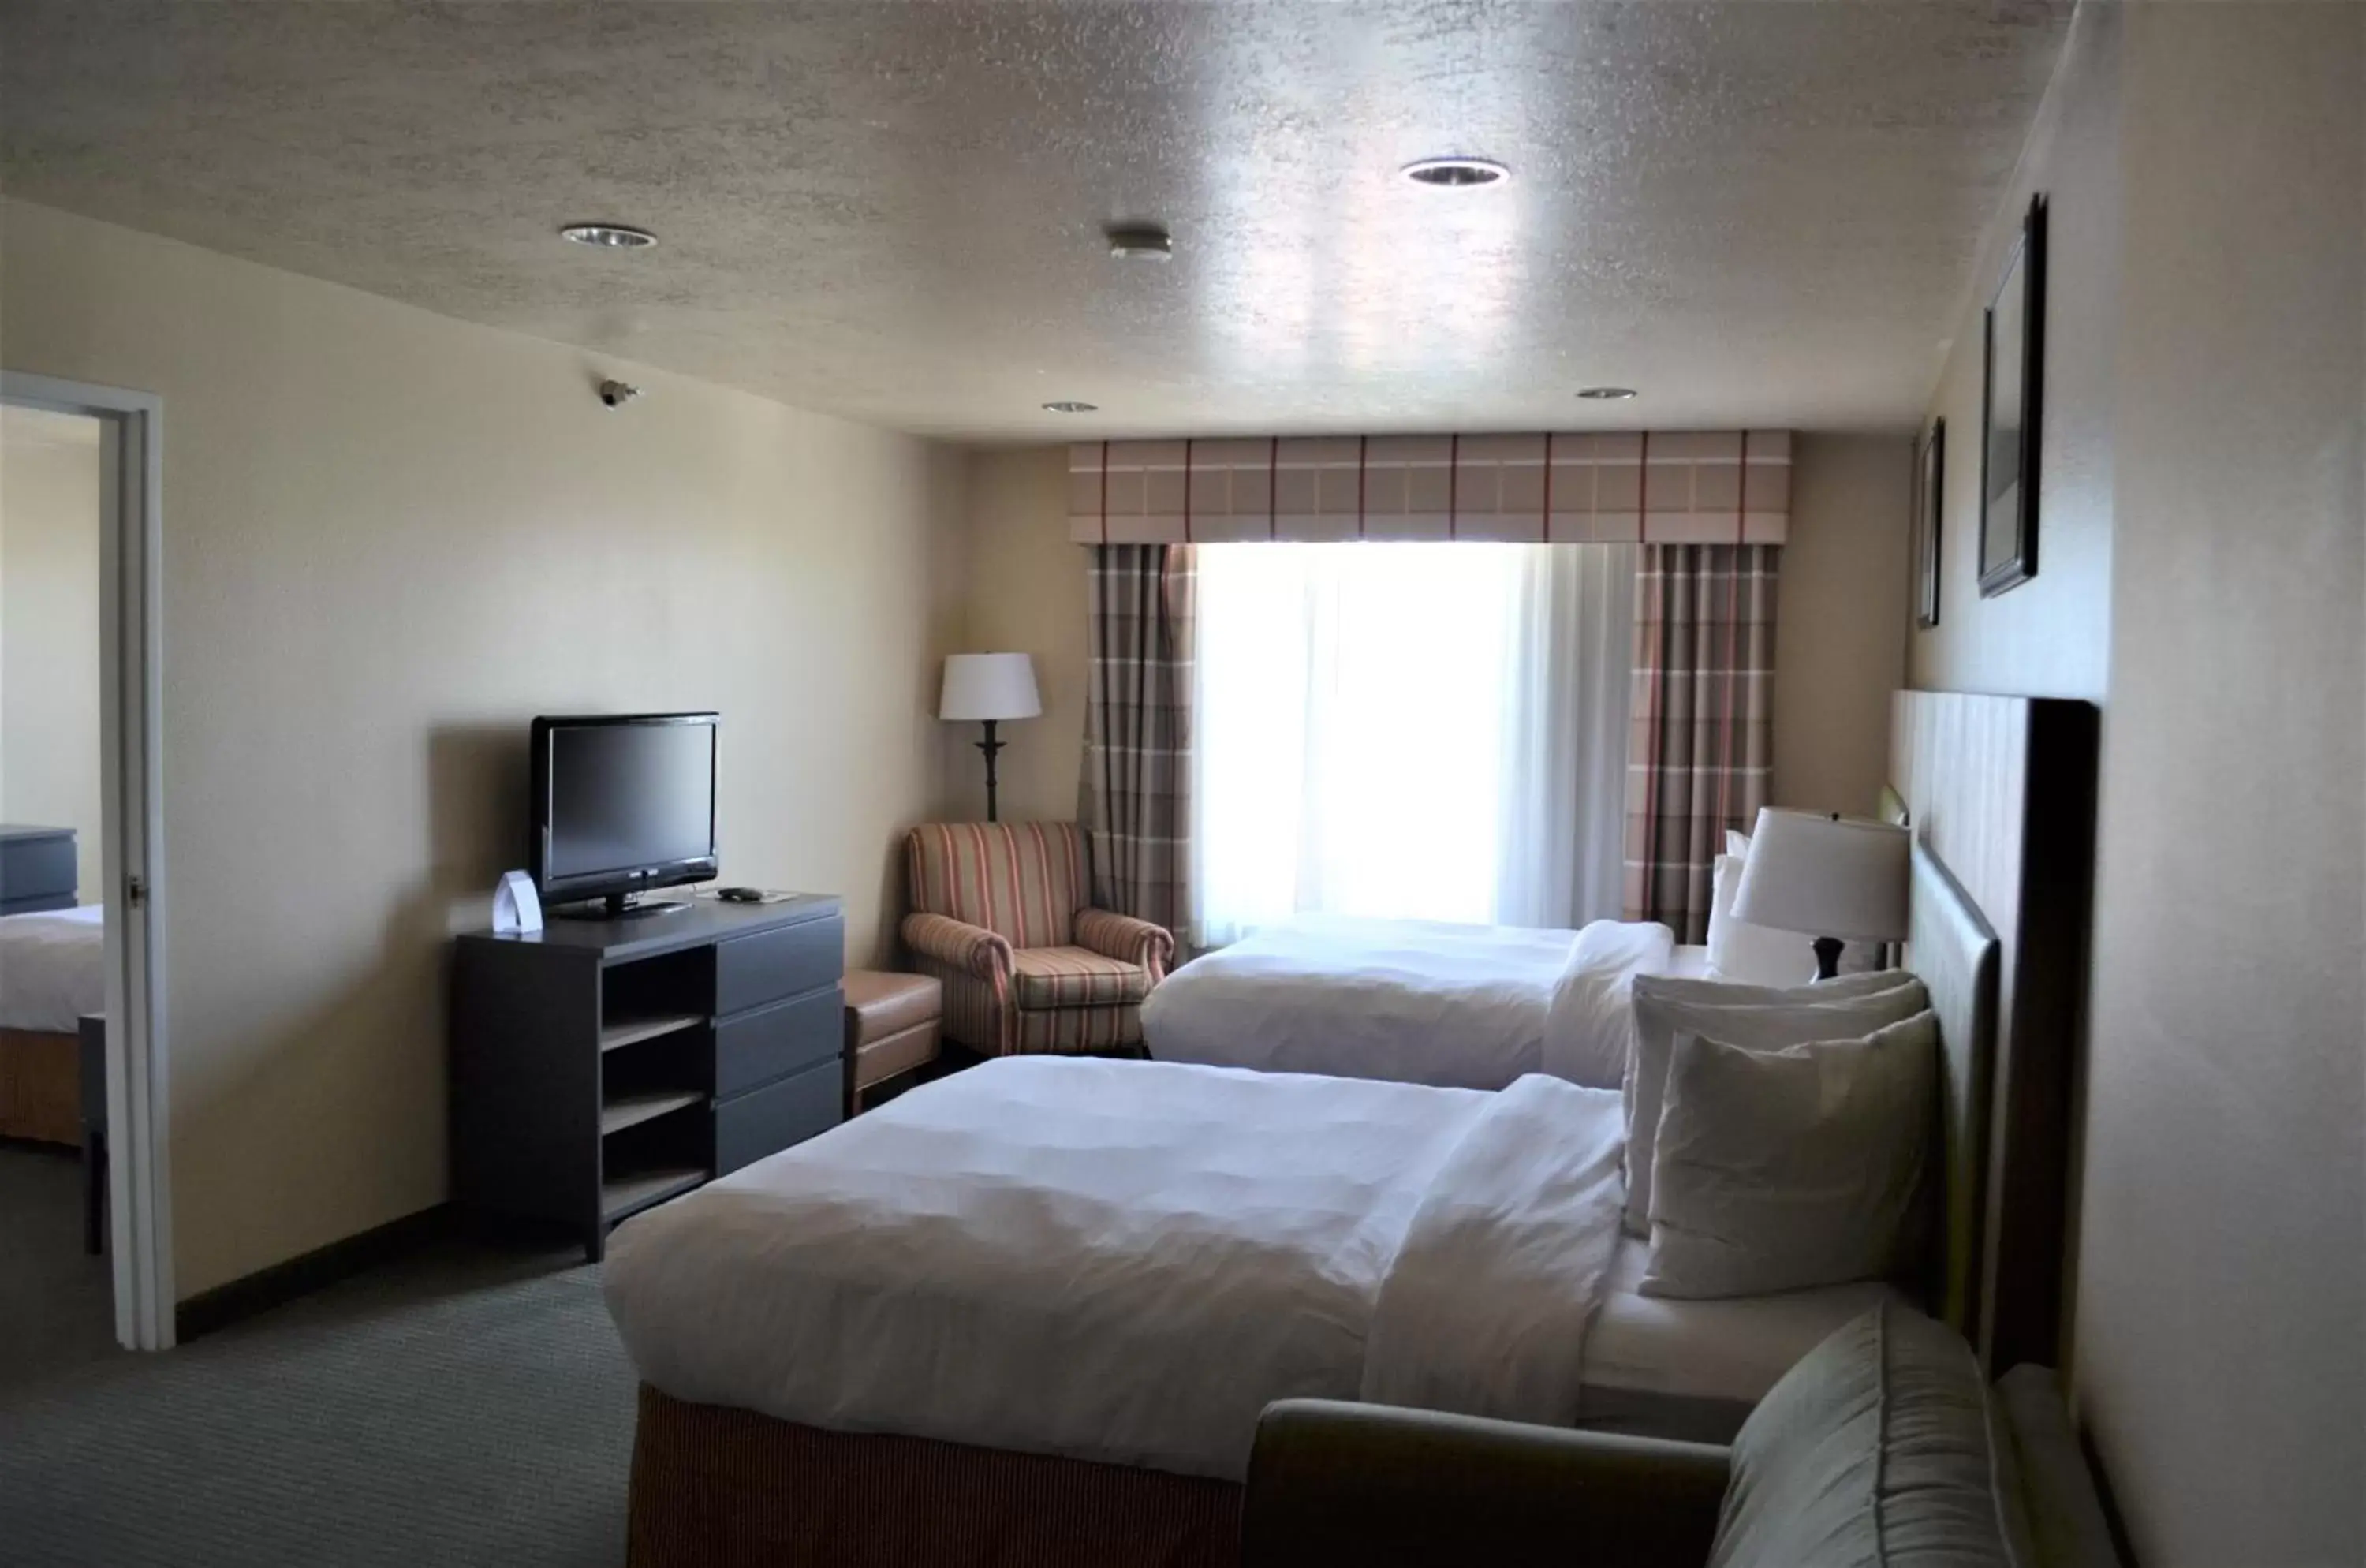 Bed in Country Inn & Suites by Radisson, West Valley City, UT